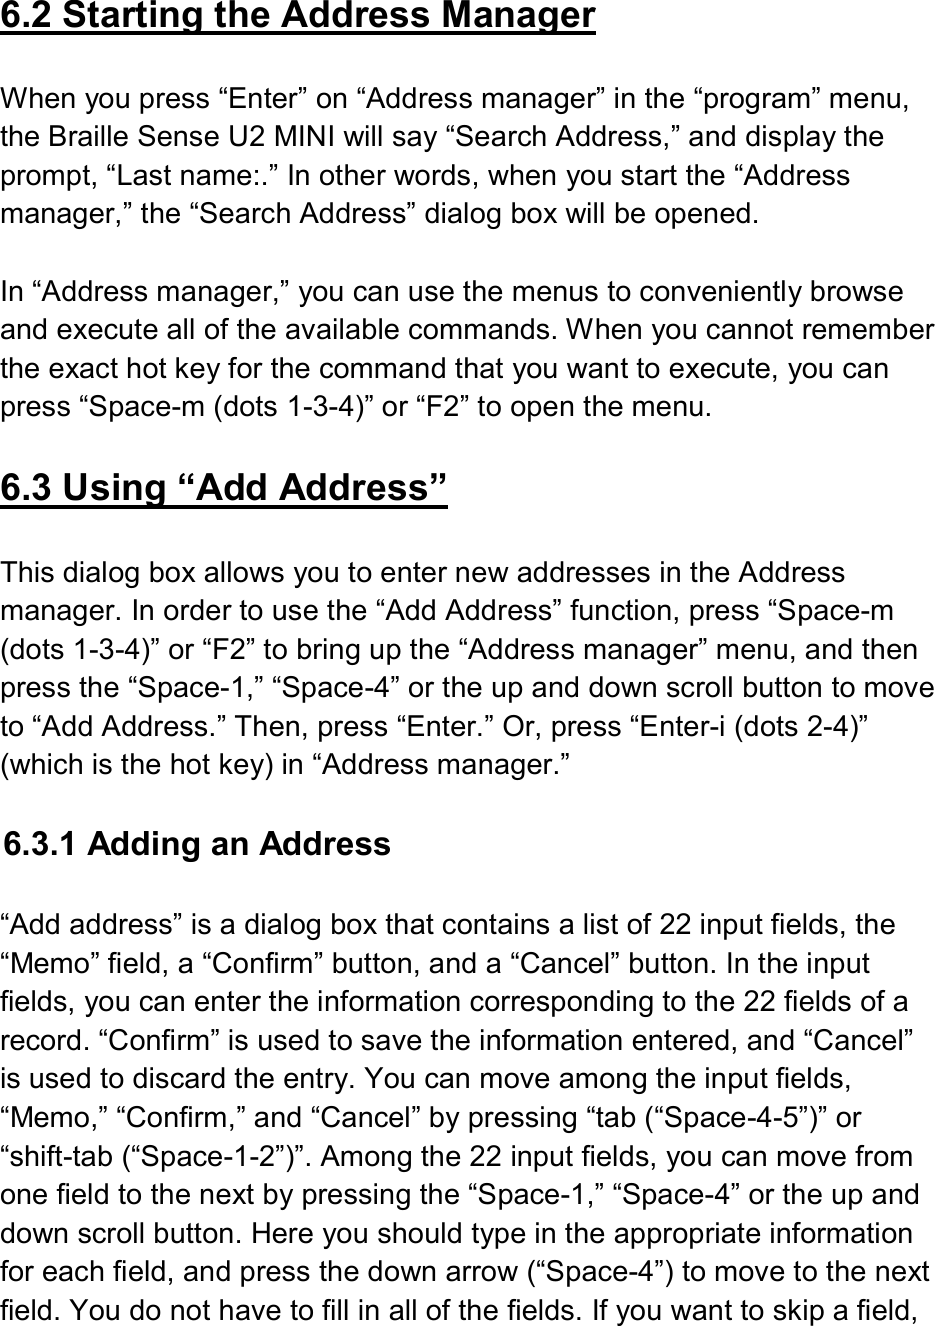   6.2 Starting the Address Manager  When you press “Enter” on “Address manager” in the “program” menu, the Braille Sense U2 MINI will say “Search Address,” and display the prompt, “Last name:.” In other words, when you start the “Address manager,” the “Search Address” dialog box will be opened.  In “Address manager,” you can use the menus to conveniently browse and execute all of the available commands. When you cannot remember the exact hot key for the command that you want to execute, you can press “Space-m (dots 1-3-4)” or “F2” to open the menu.  6.3 Using “Add Address”  This dialog box allows you to enter new addresses in the Address manager. In order to use the “Add Address” function, press “Space-m (dots 1-3-4)” or “F2” to bring up the “Address manager” menu, and then press the “Space-1,” “Space-4” or the up and down scroll button to move to “Add Address.” Then, press “Enter.” Or, press “Enter-i (dots 2-4)” (which is the hot key) in “Address manager.”    6.3.1 Adding an Address  “Add address” is a dialog box that contains a list of 22 input fields, the “Memo” field, a “Confirm” button, and a “Cancel” button. In the input fields, you can enter the information corresponding to the 22 fields of a record. “Confirm” is used to save the information entered, and “Cancel” is used to discard the entry. You can move among the input fields, “Memo,” “Confirm,” and “Cancel” by pressing “tab (“Space-4-5”)” or “shift-tab (“Space-1-2”)”. Among the 22 input fields, you can move from one field to the next by pressing the “Space-1,” “Space-4” or the up and down scroll button. Here you should type in the appropriate information for each field, and press the down arrow (“Space-4”) to move to the next field. You do not have to fill in all of the fields. If you want to skip a field, 